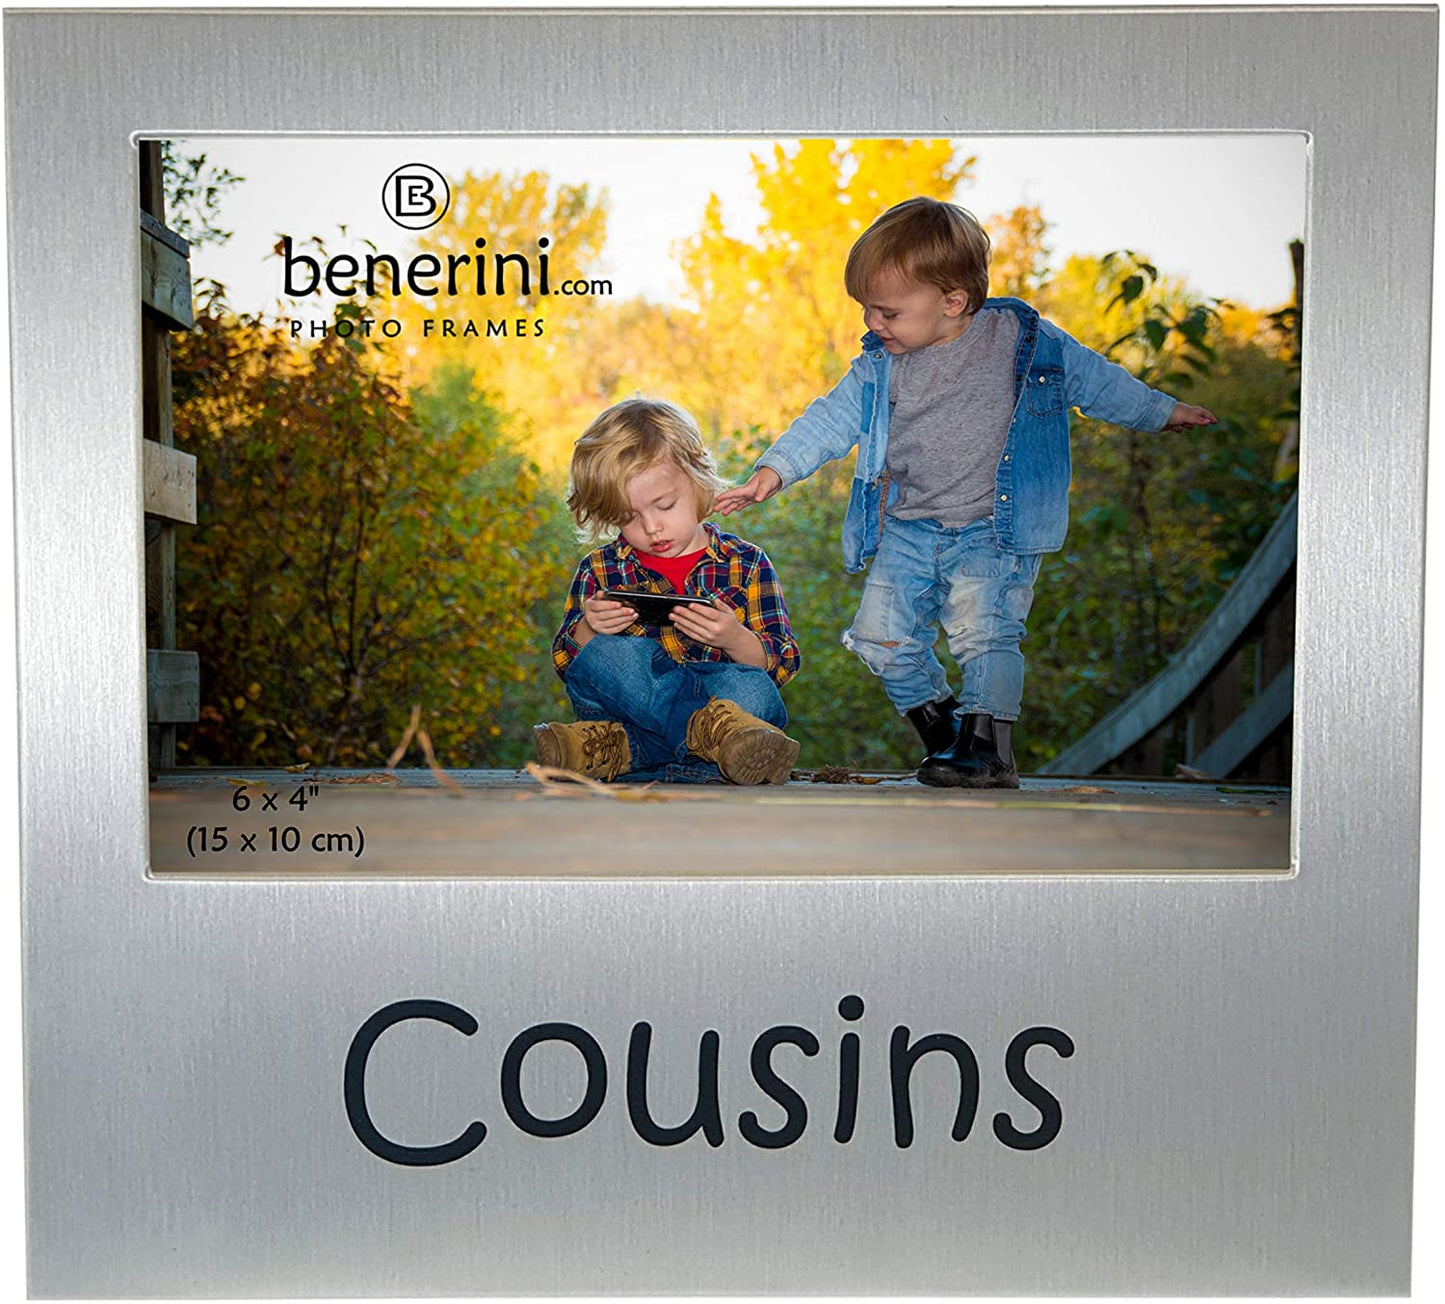 benerini ' Cousins ' - Photo Picture Frame Gift - Will take a Photo of 6 x 4 Inches (15 x 10 cm) - (For 8 piece(s))